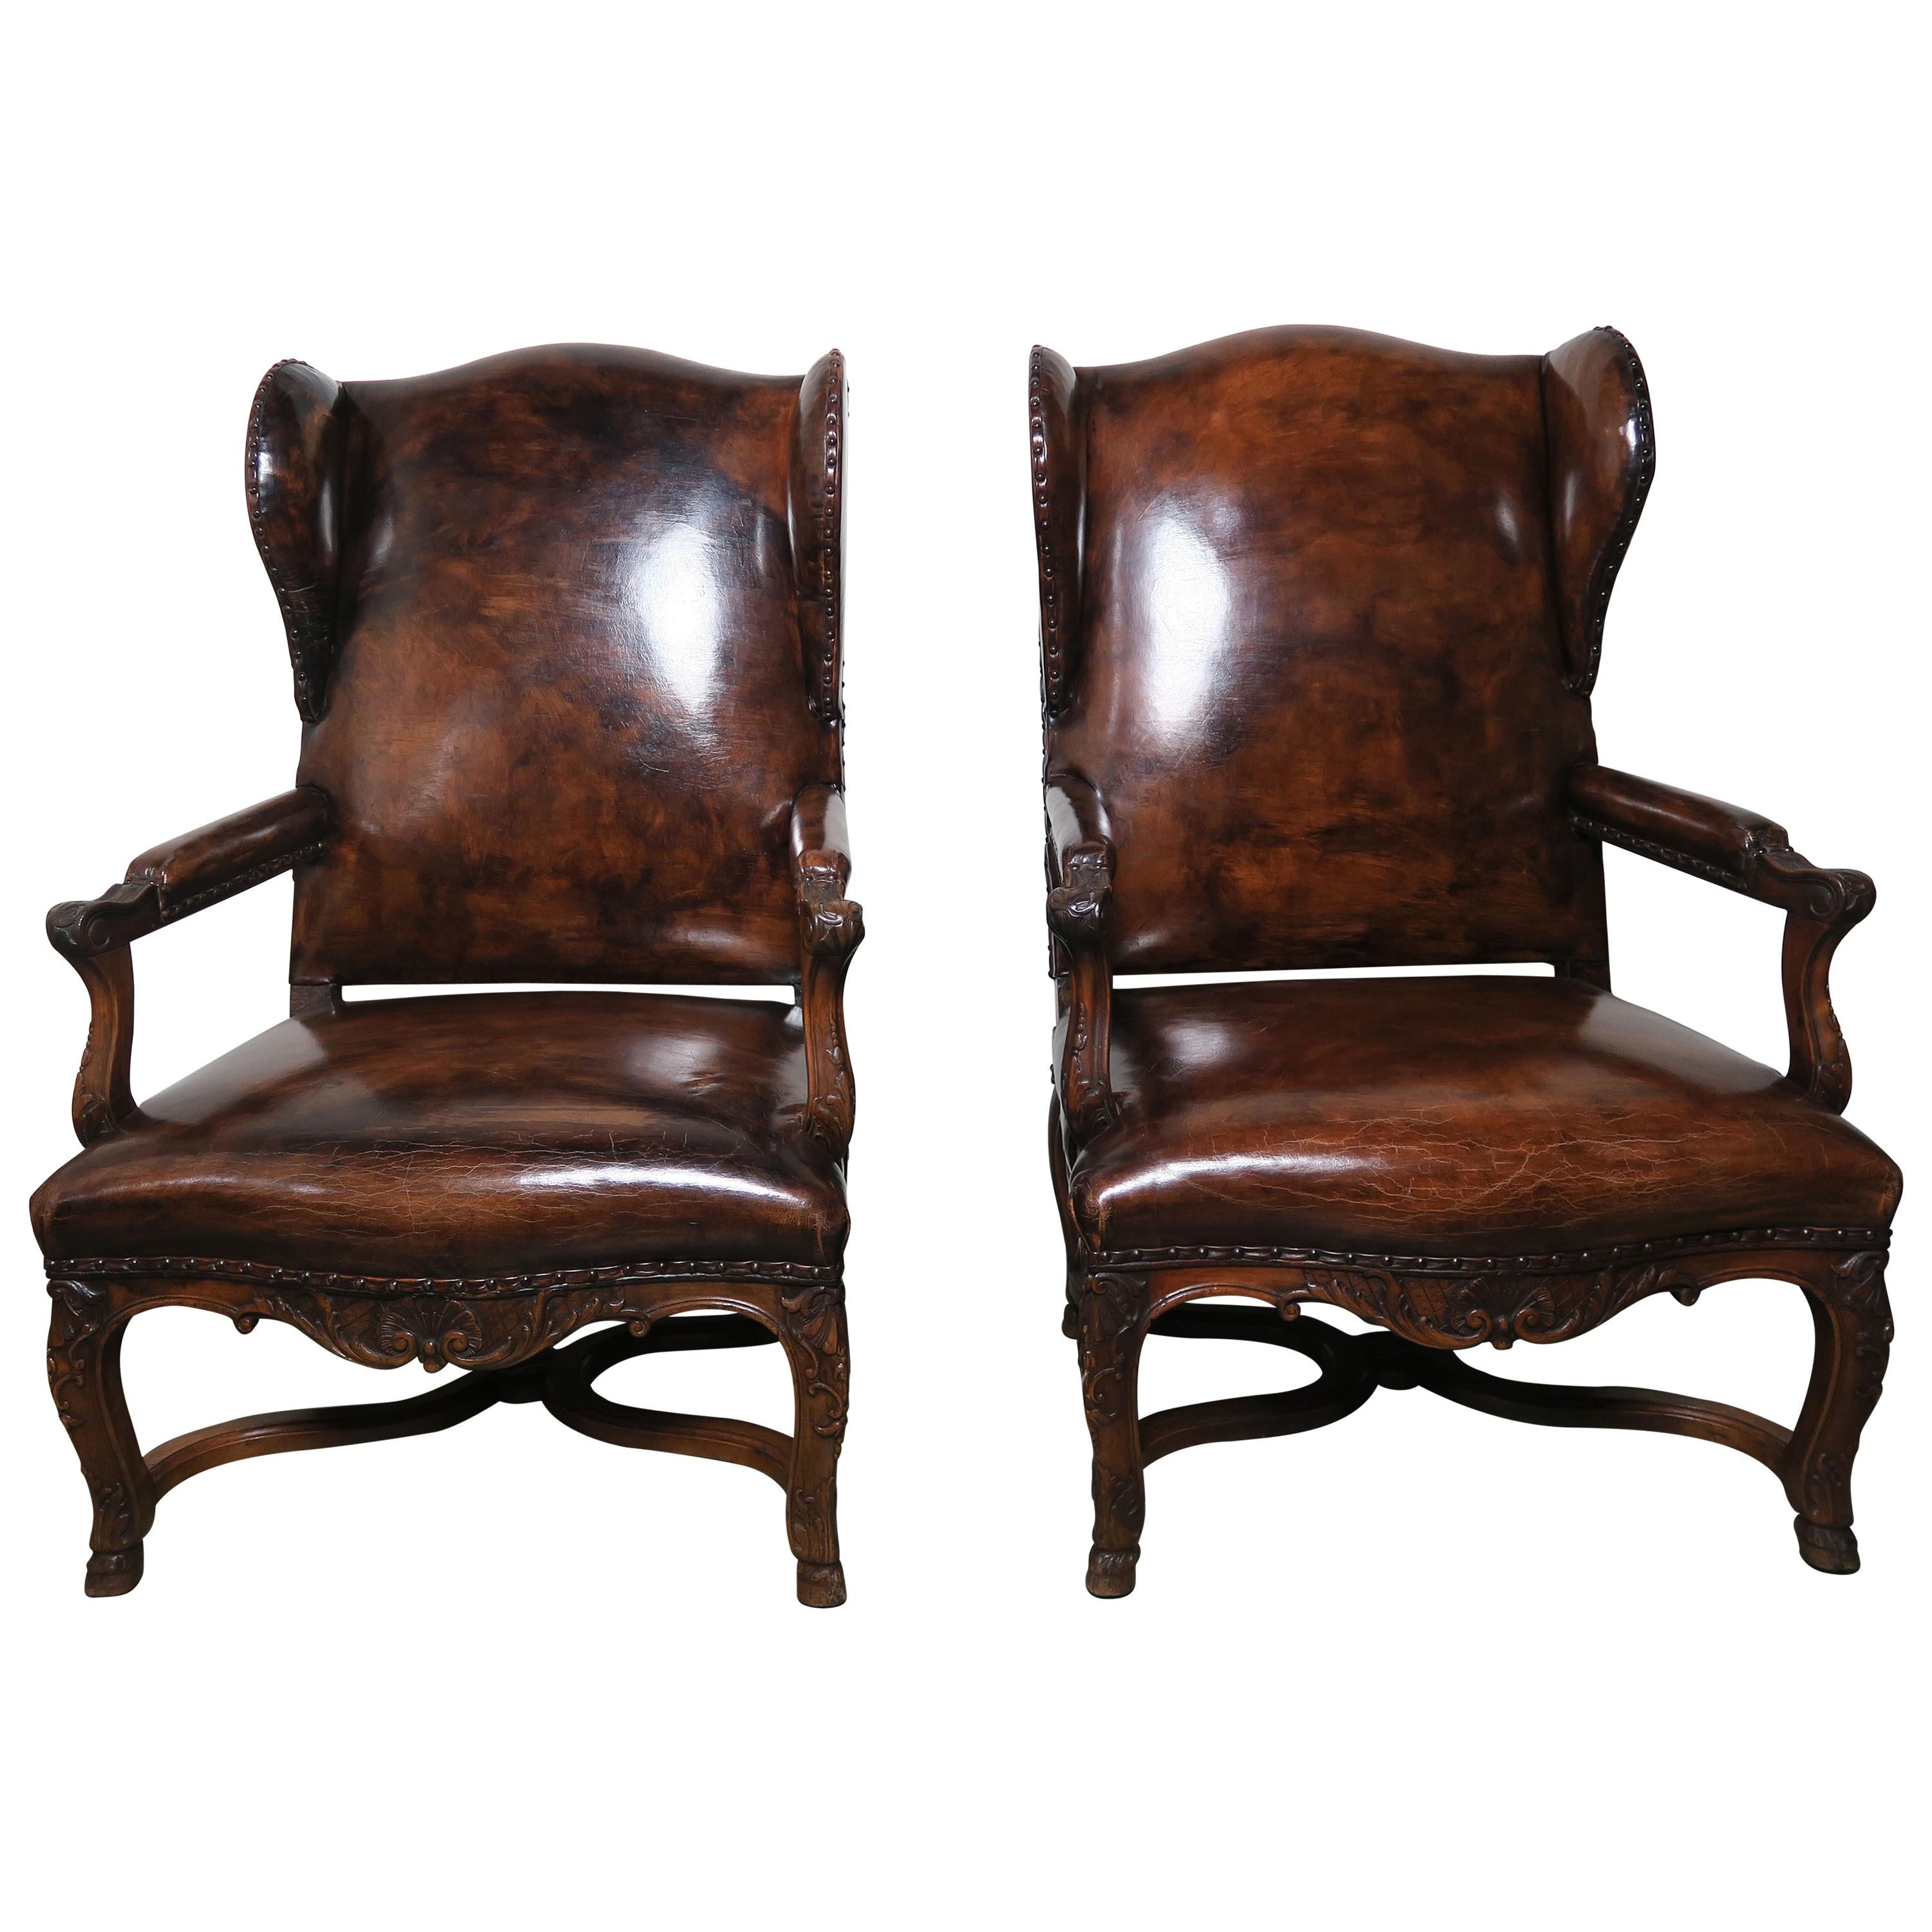 Pair of Regency Style French Leather Wing-Back Armchairs